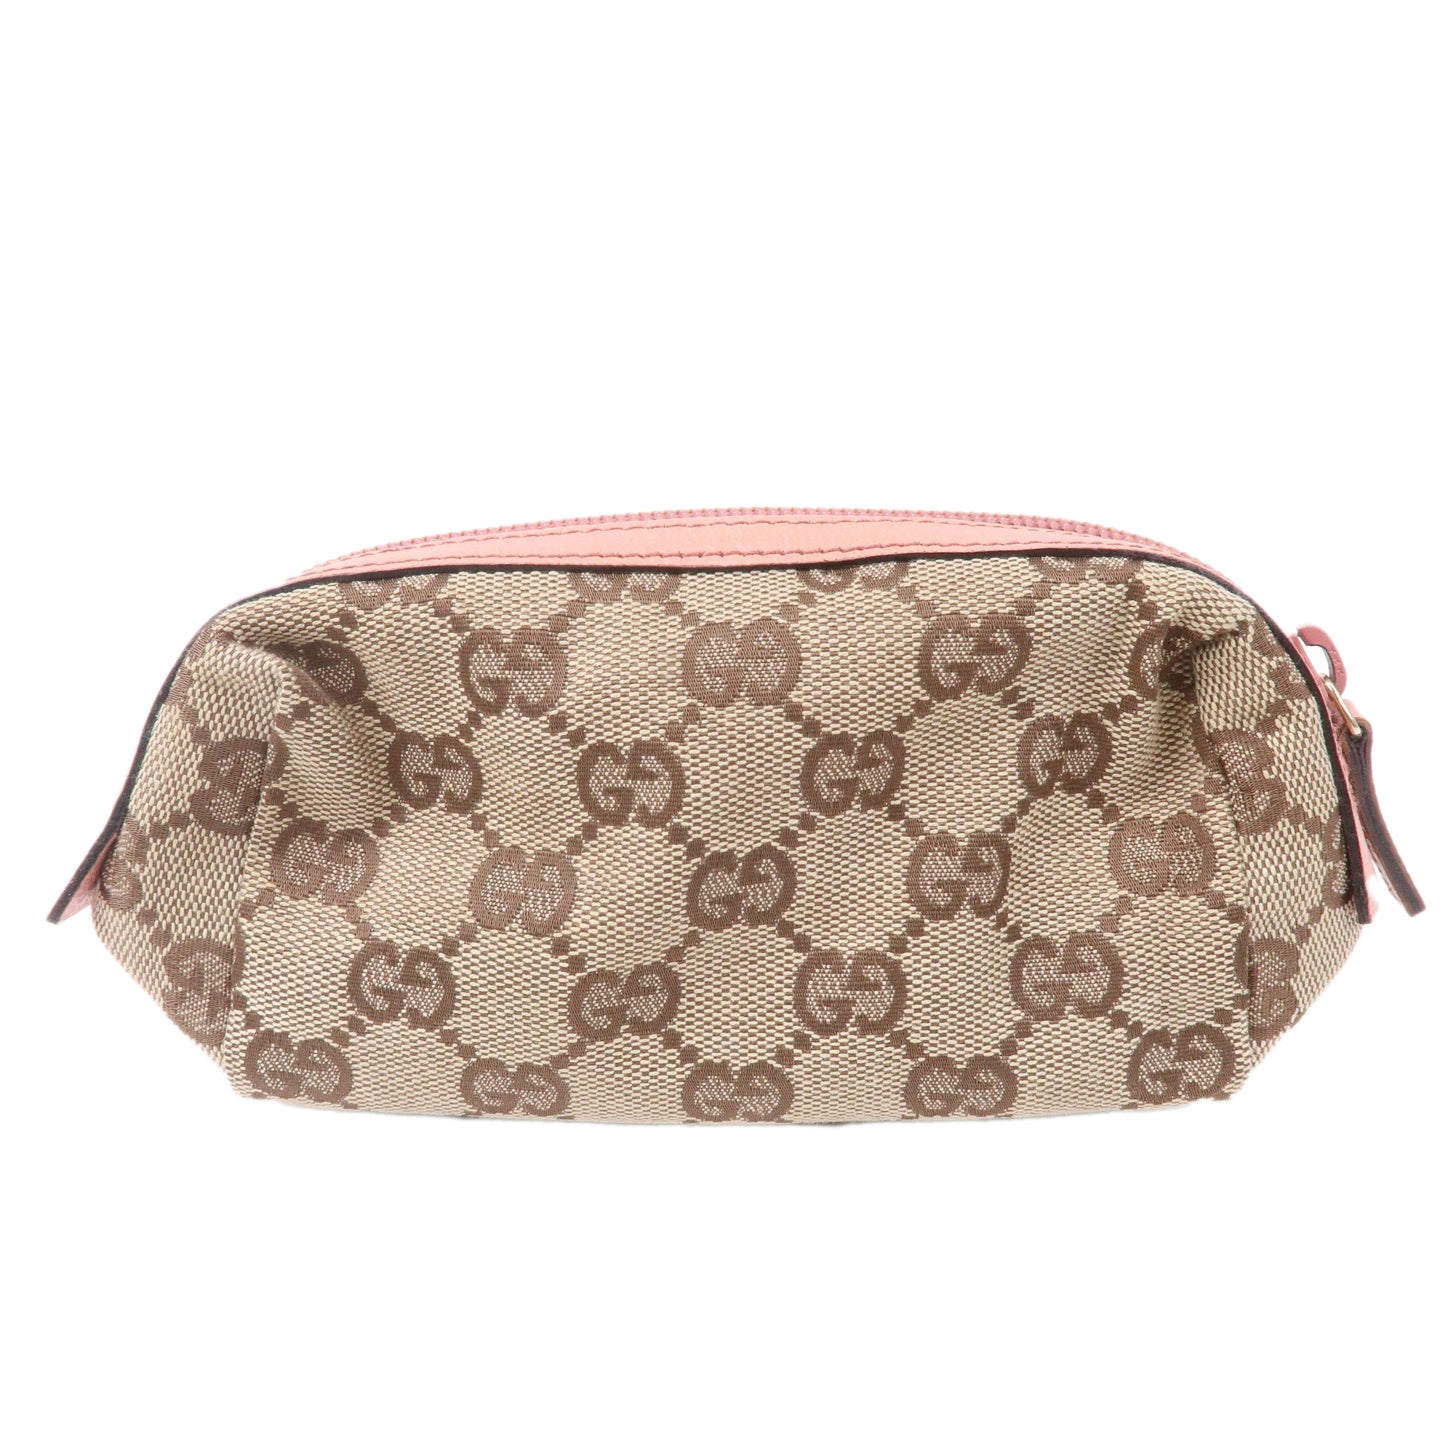 Gucci GG Canvas Toiletry Bag, Beige